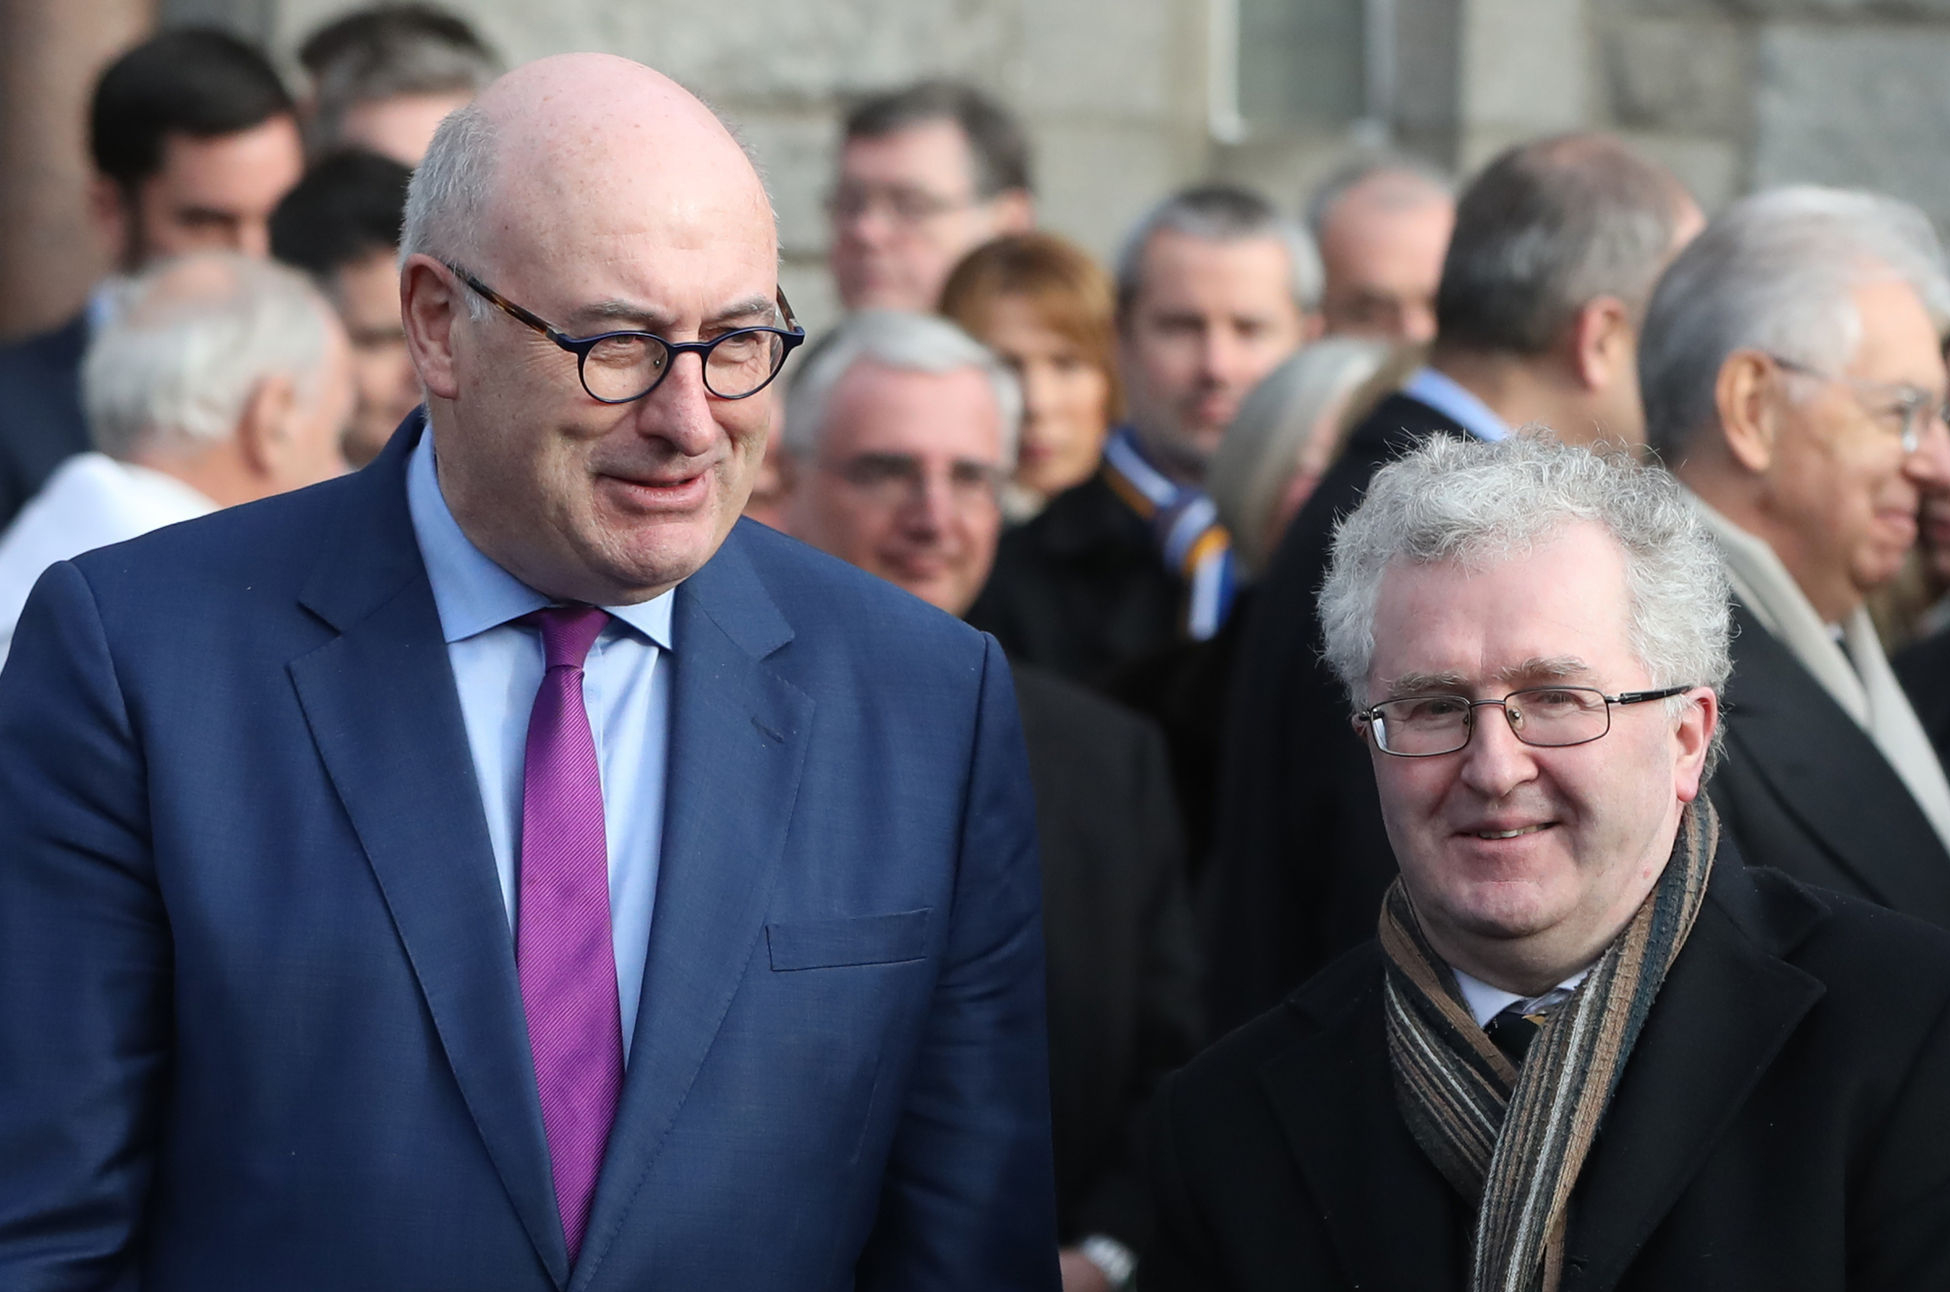 Phil Hogan (left) and Seamus Woulfe attend the funeral of Peter Sutherland at the Church of the Sacred Heart, Donnybrook #GolfGate